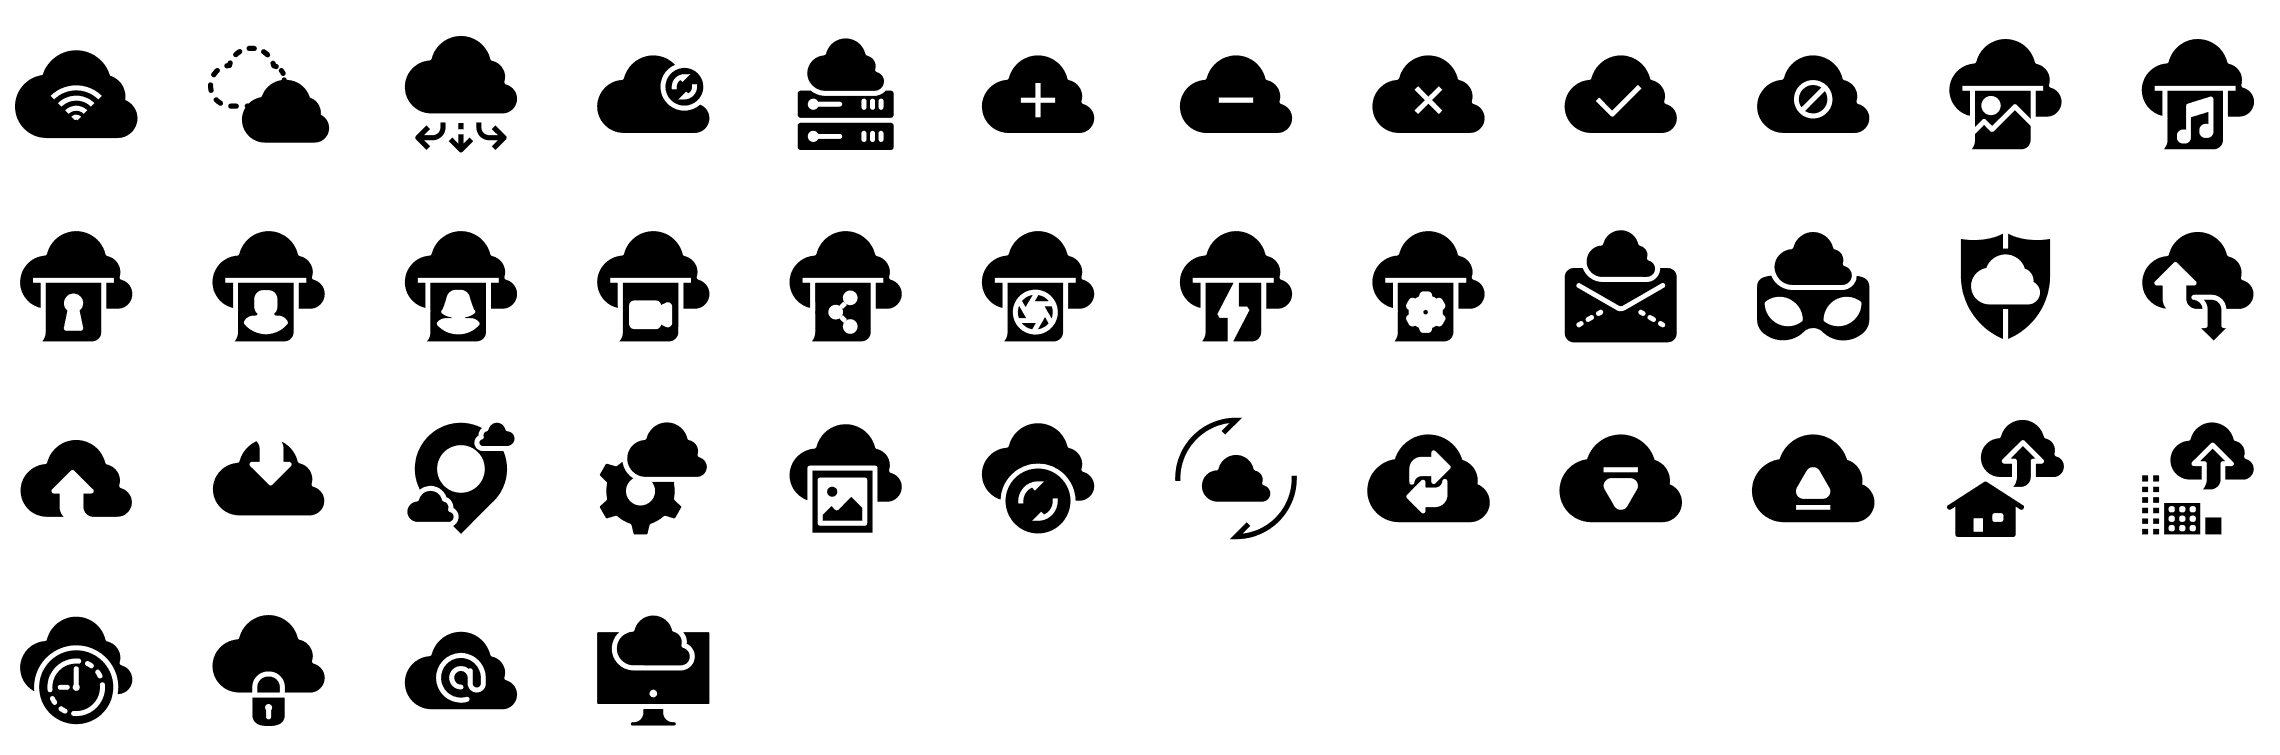 cloud-glyph-icons-preview